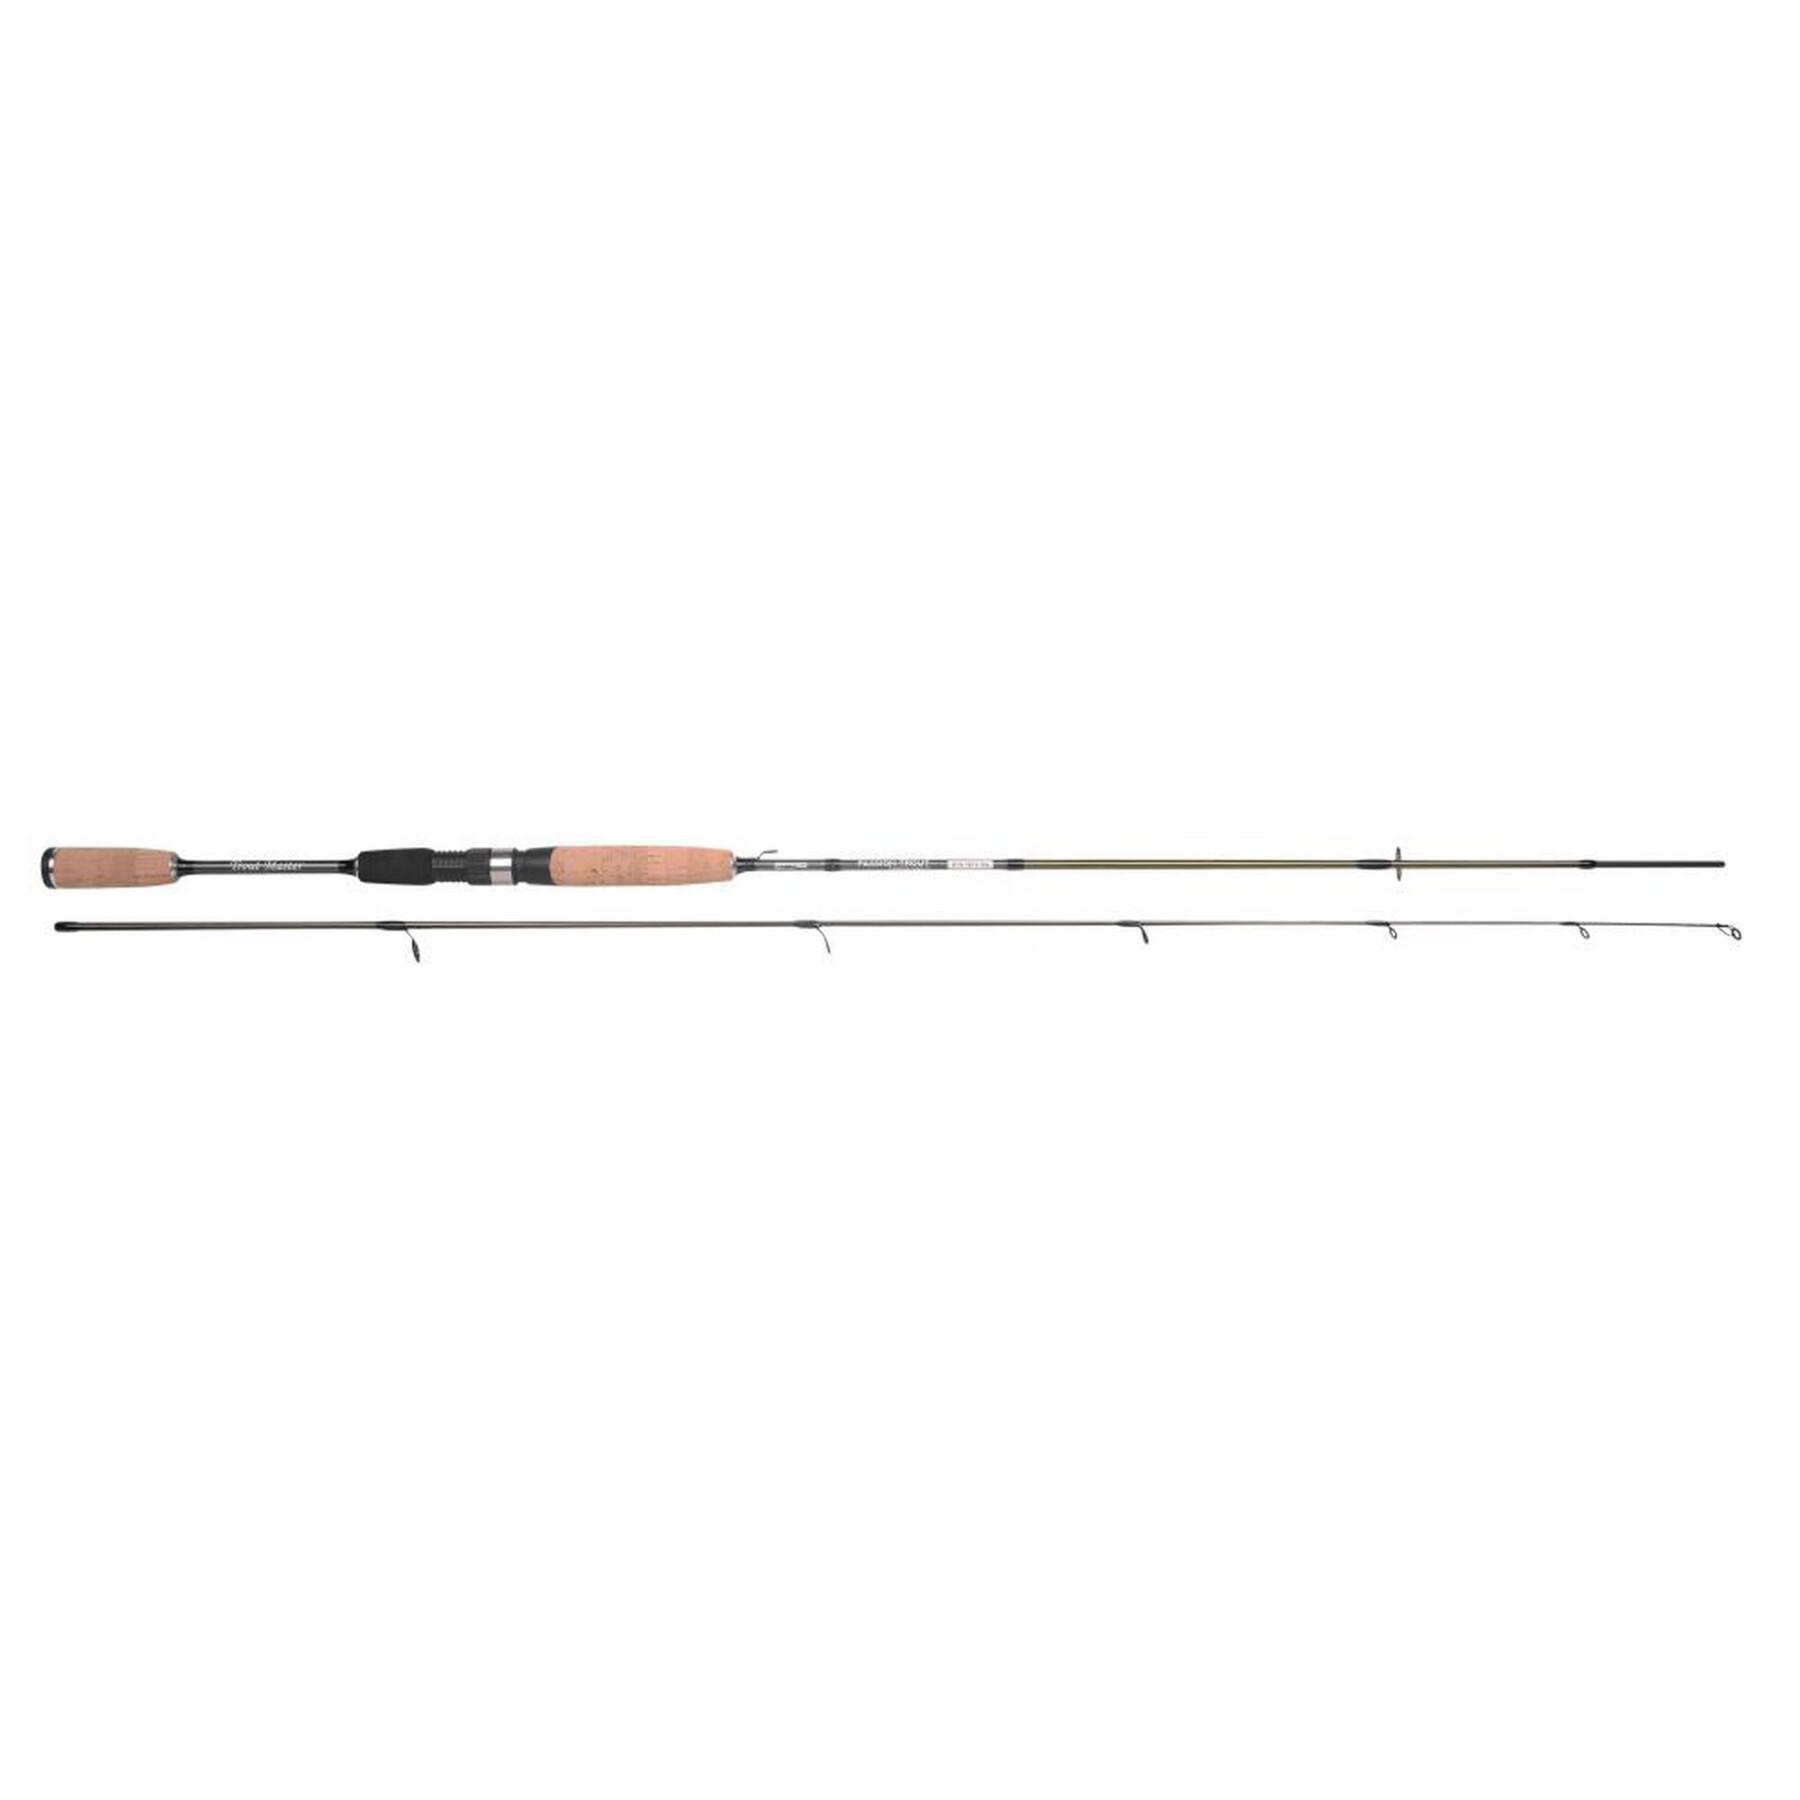 Spinnrute Spro passion trout 3-10g